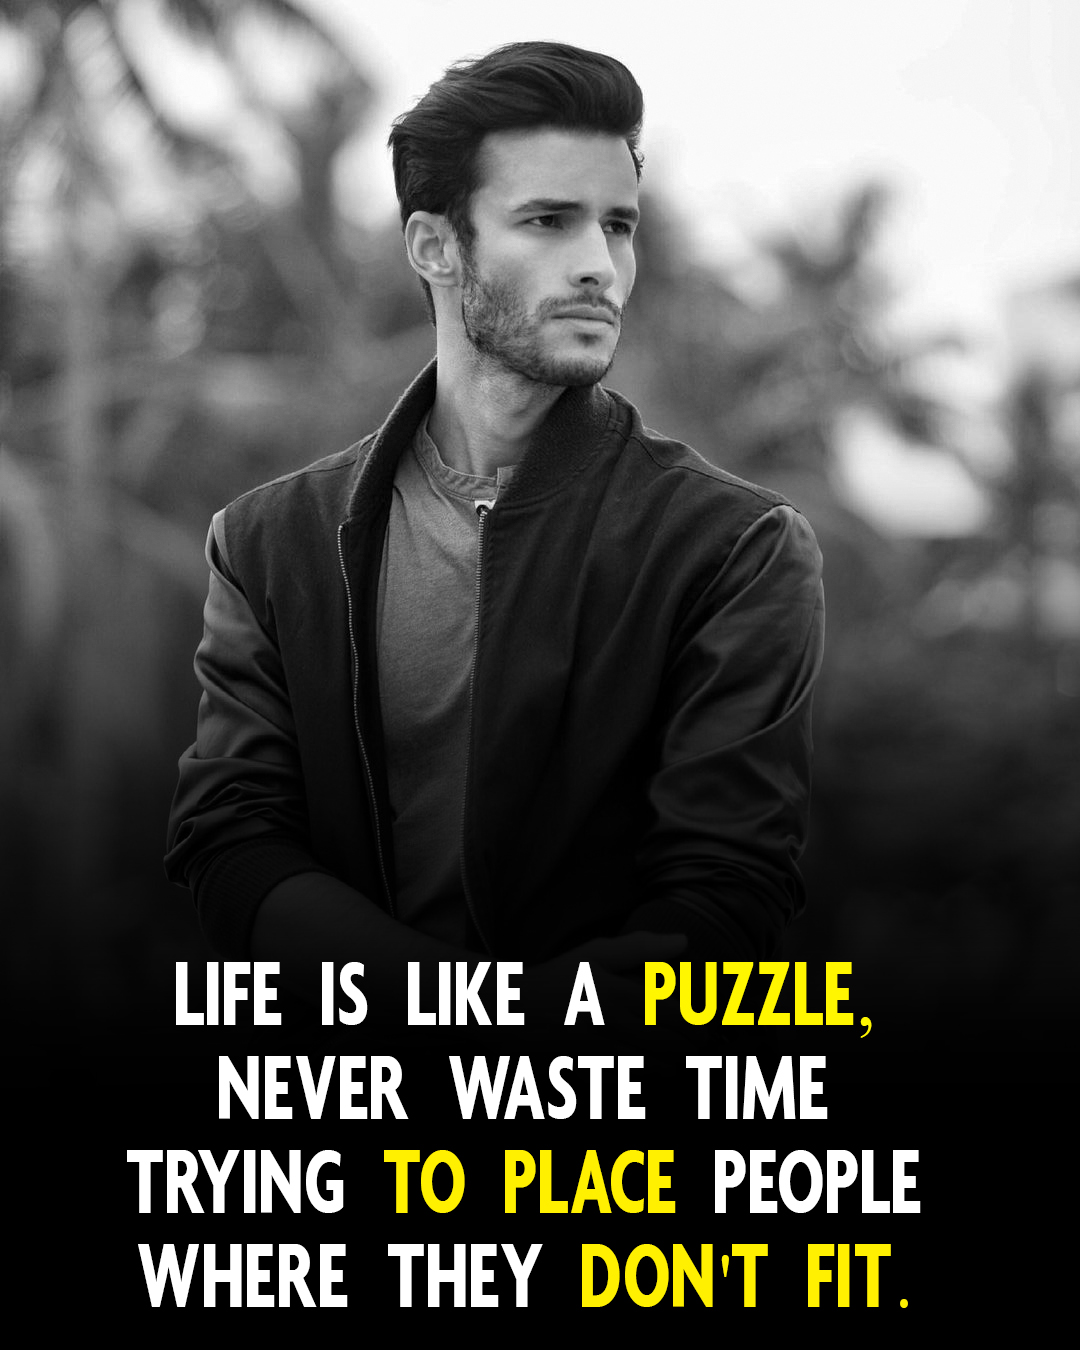 Life is Like a puzzle, never waste time trying to place people where they don’t fit.